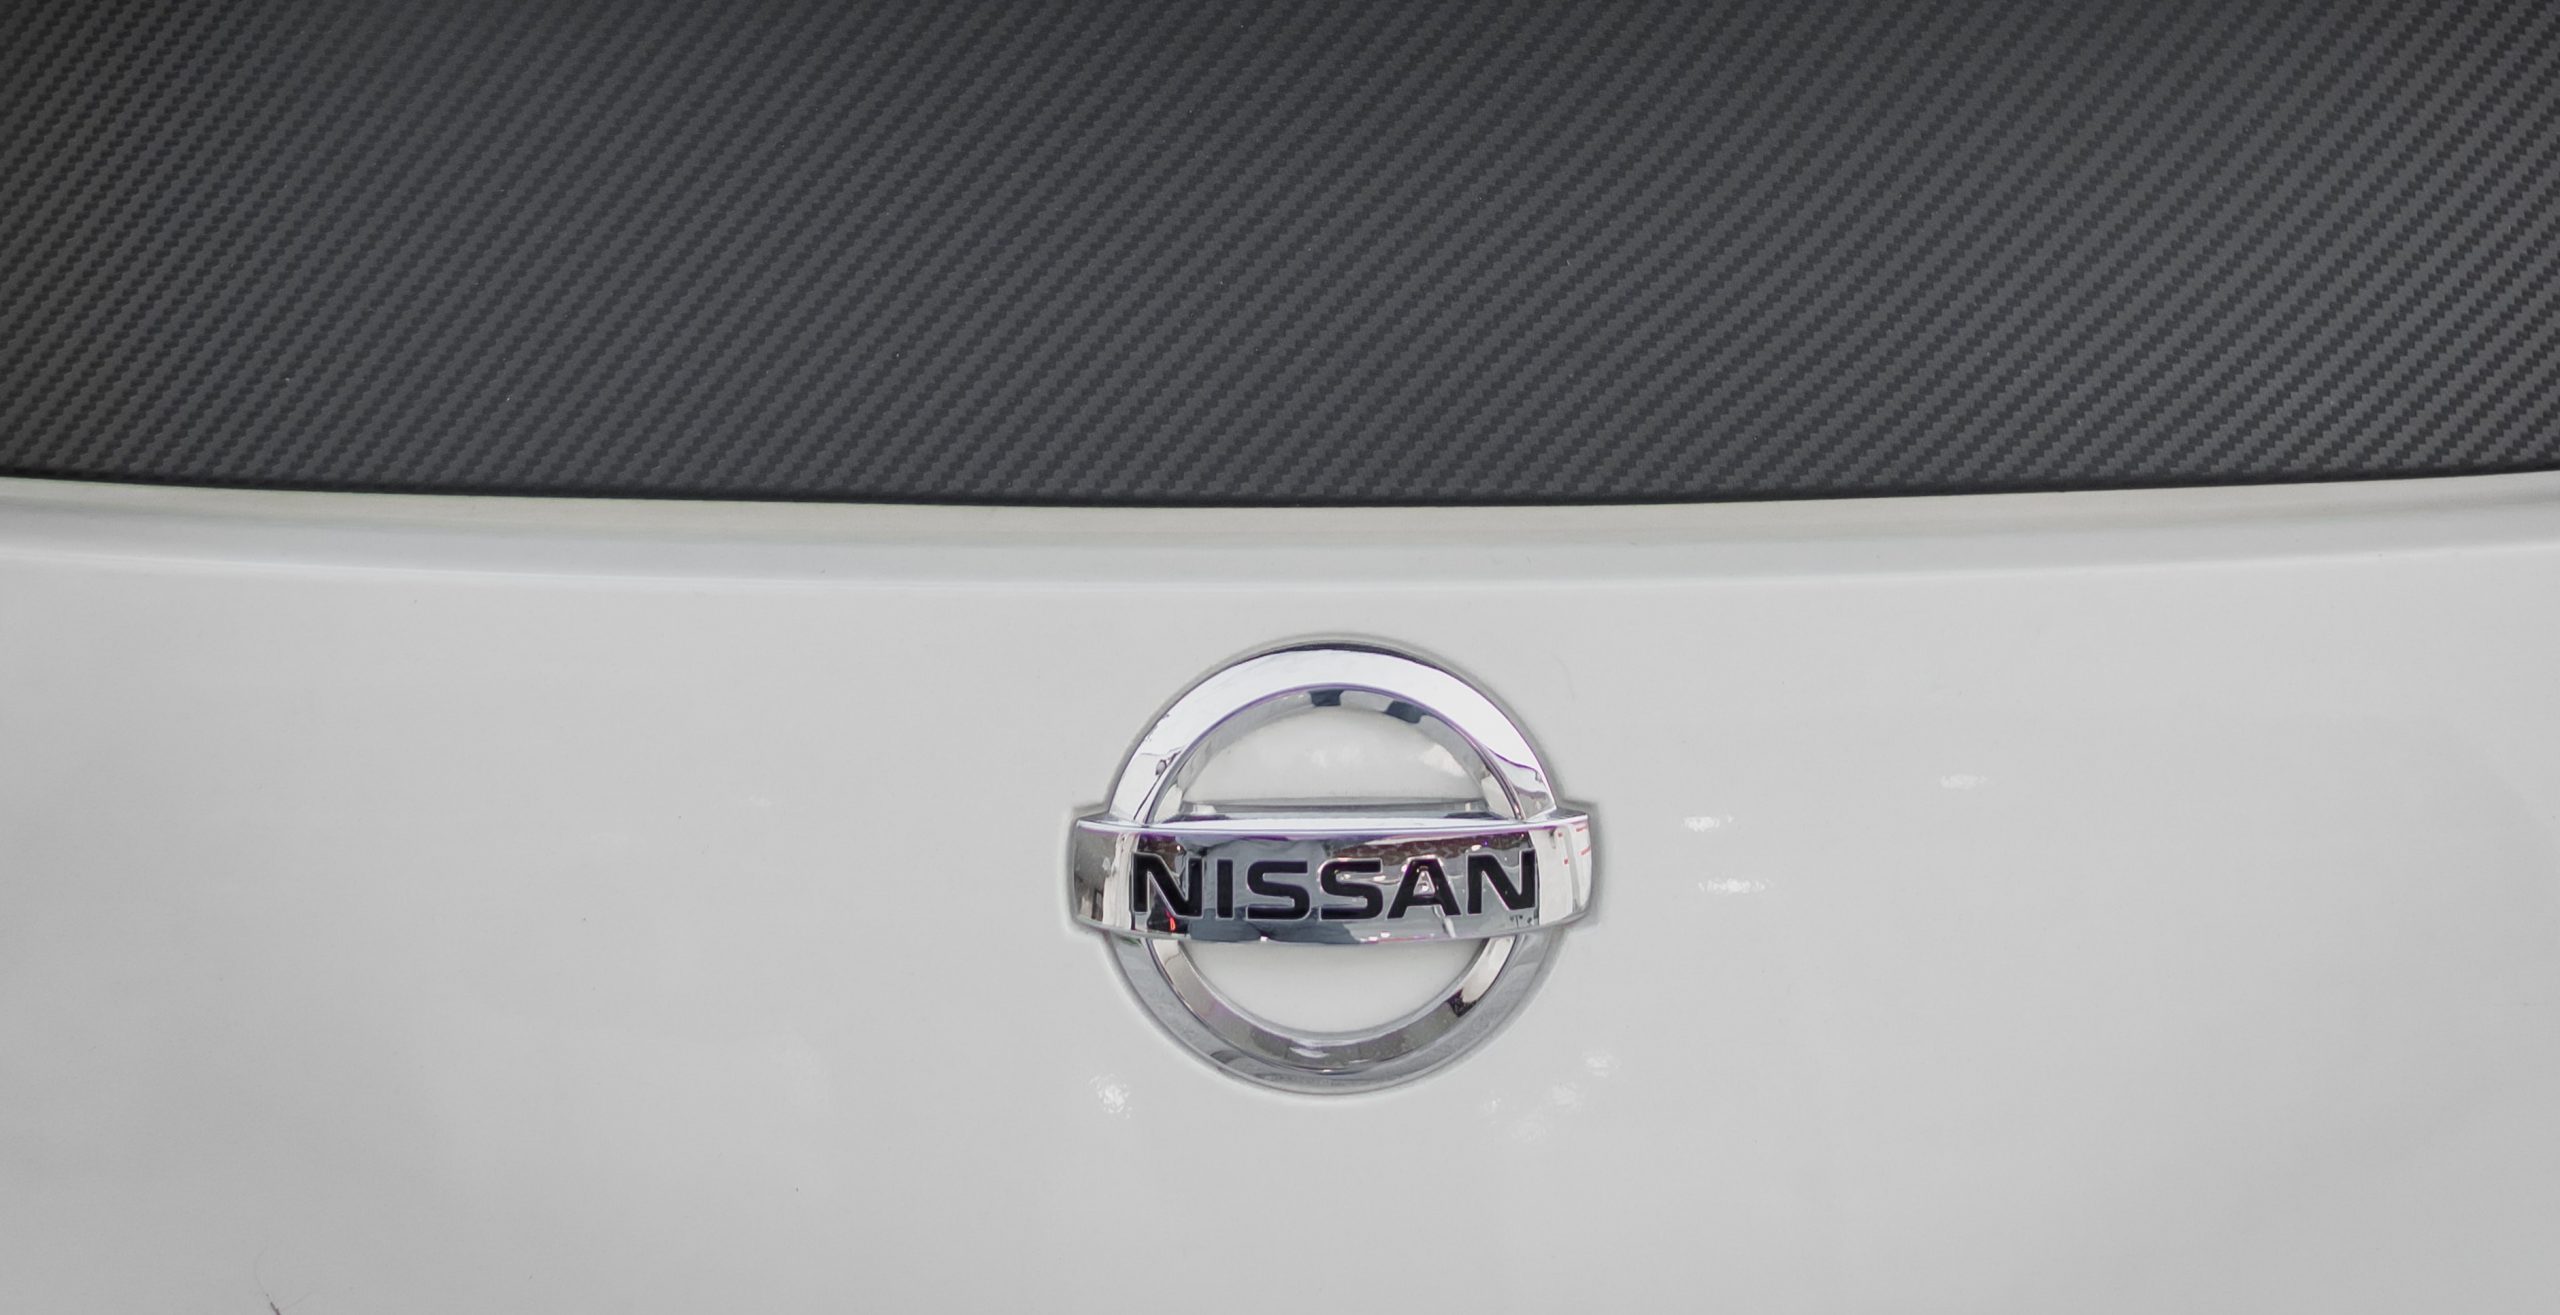 Minivan Marvel: The Nissan Quest Is The Best Minivan In All The Land